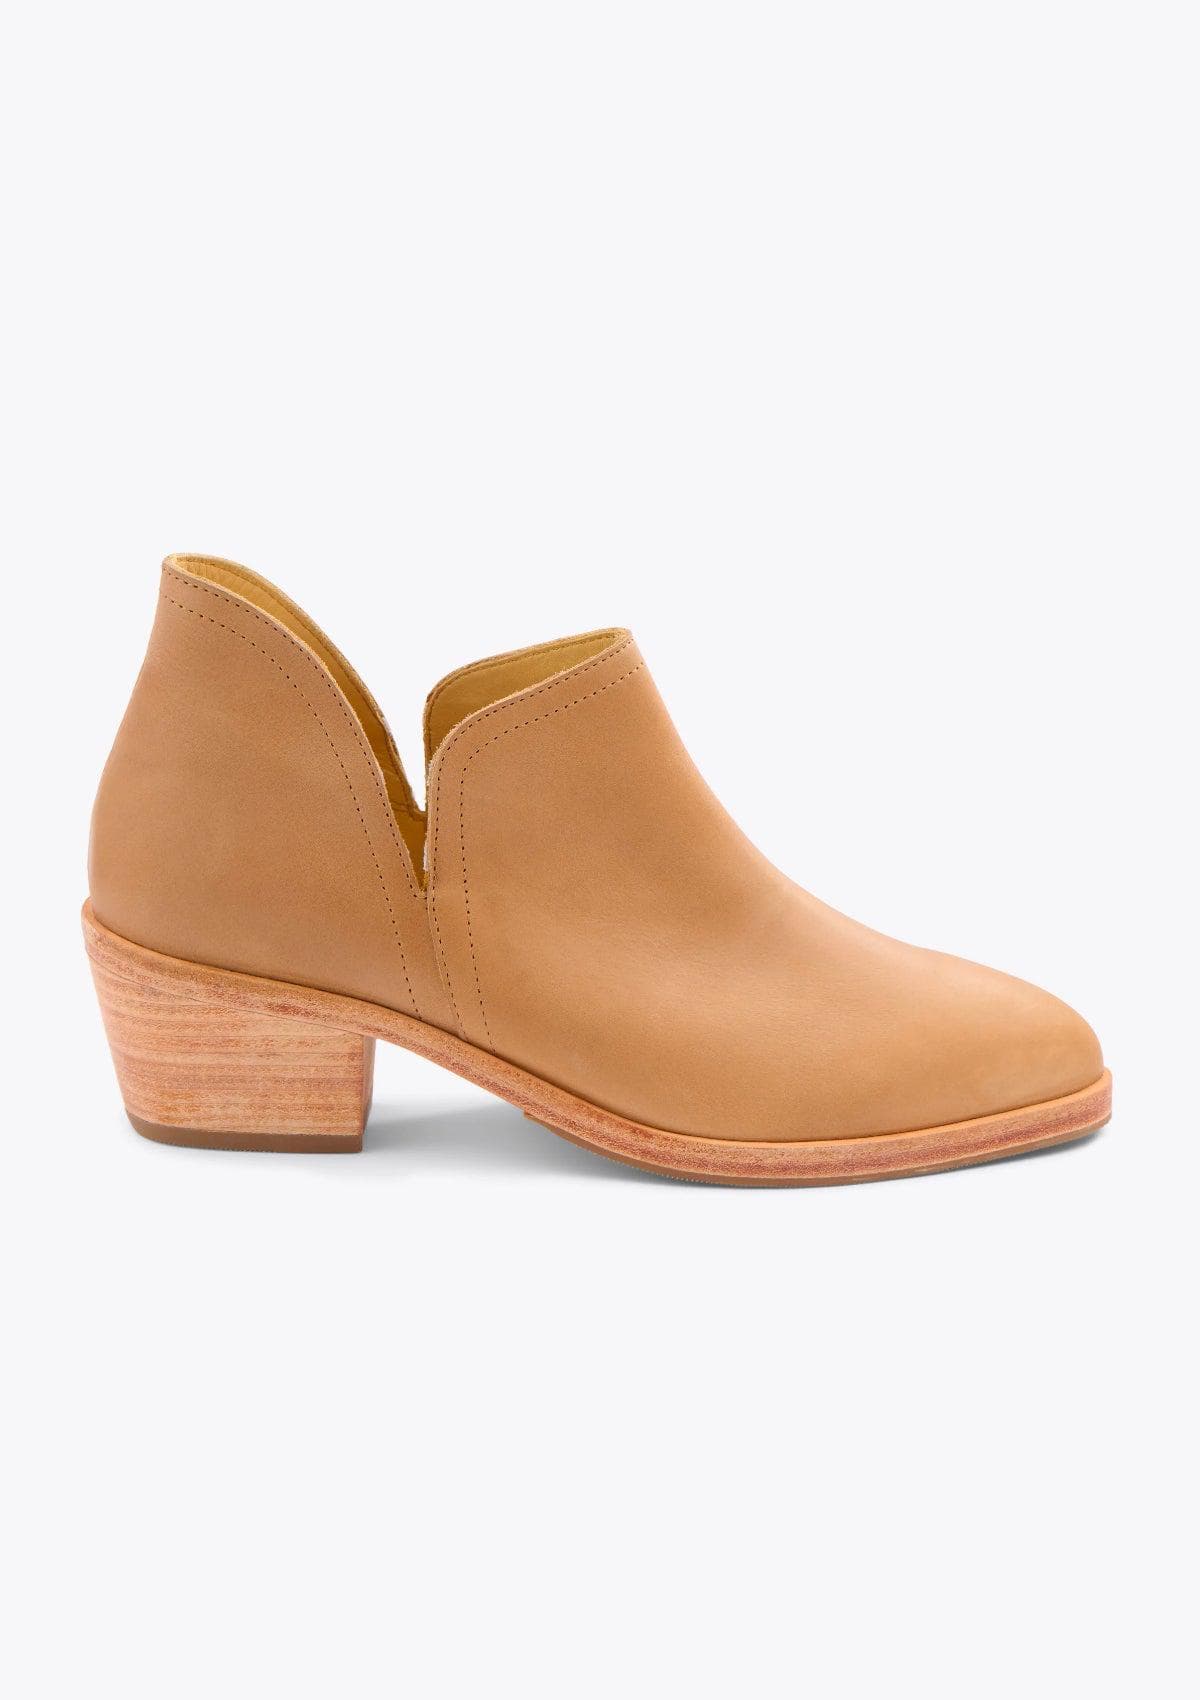 Nisolo Everyday Ankle Bootie - Almond